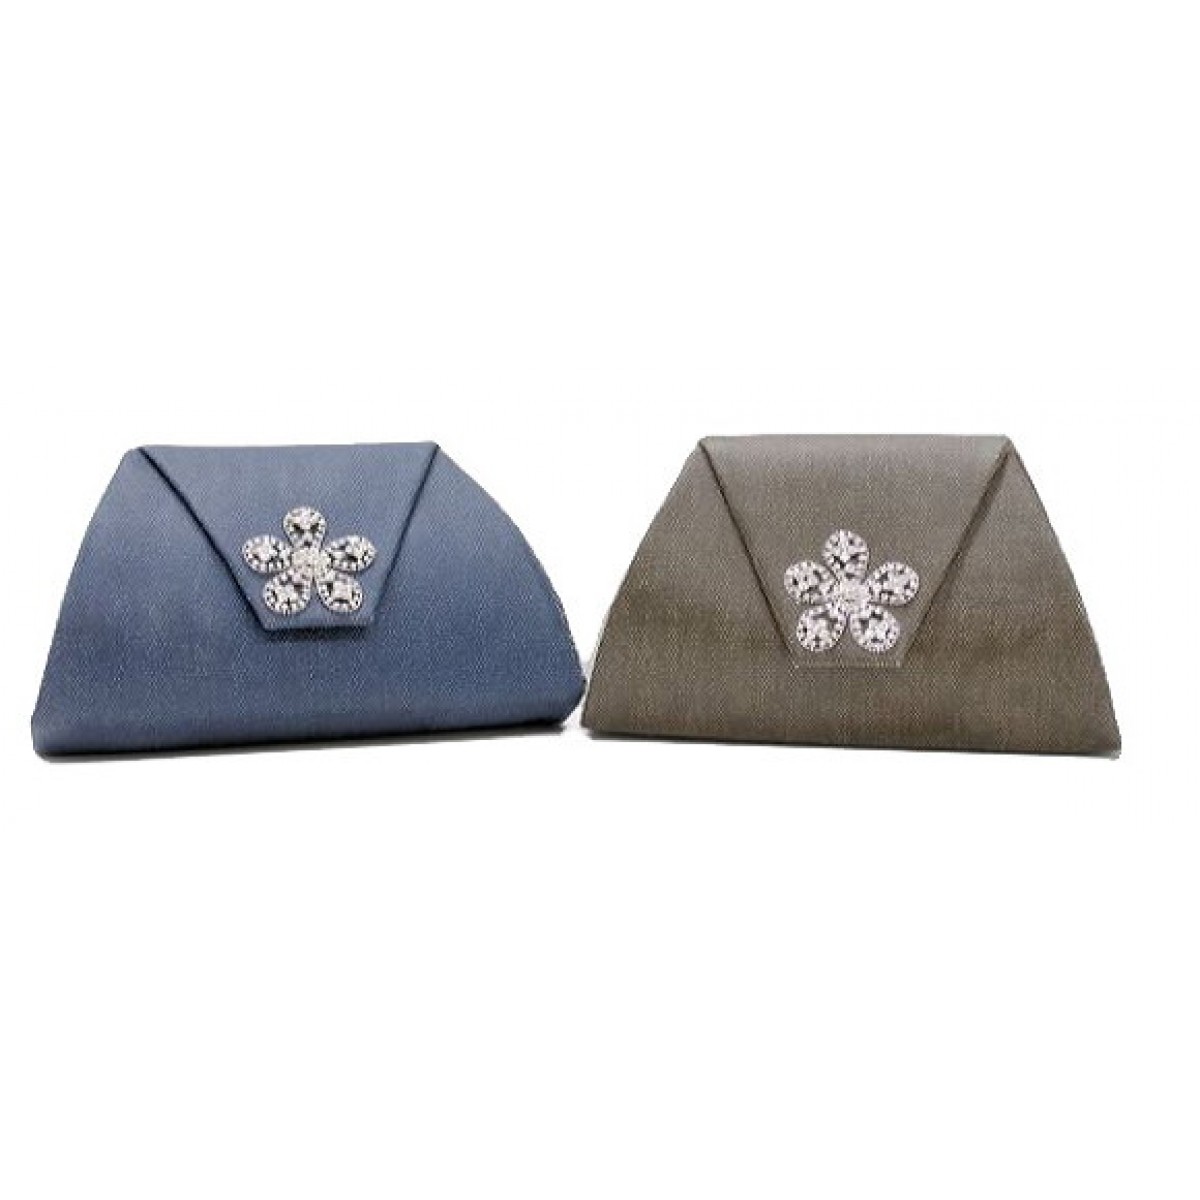 Crystal Broach Clutch with Strap